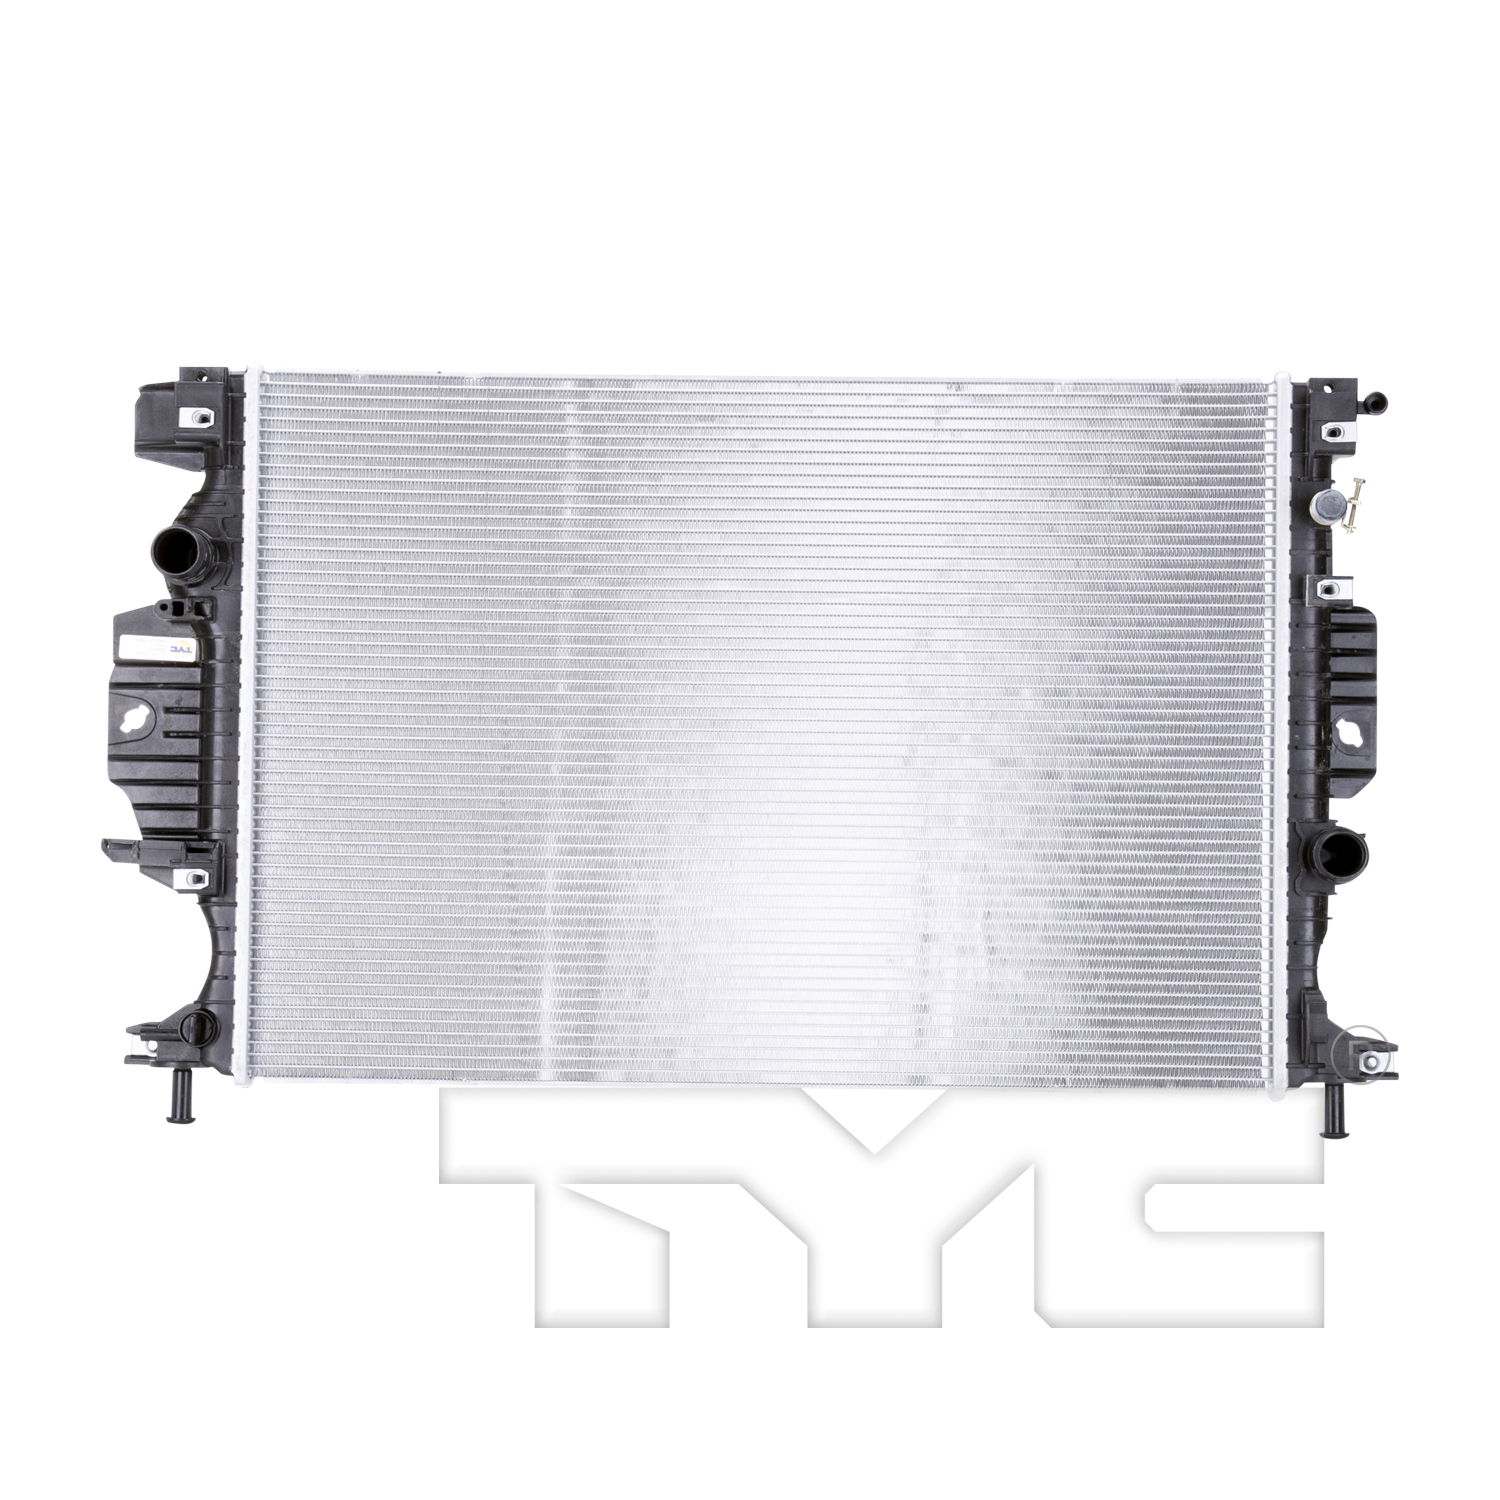 Aftermarket RADIATORS for FORD - FUSION, FUSION,13-18,Radiator assembly